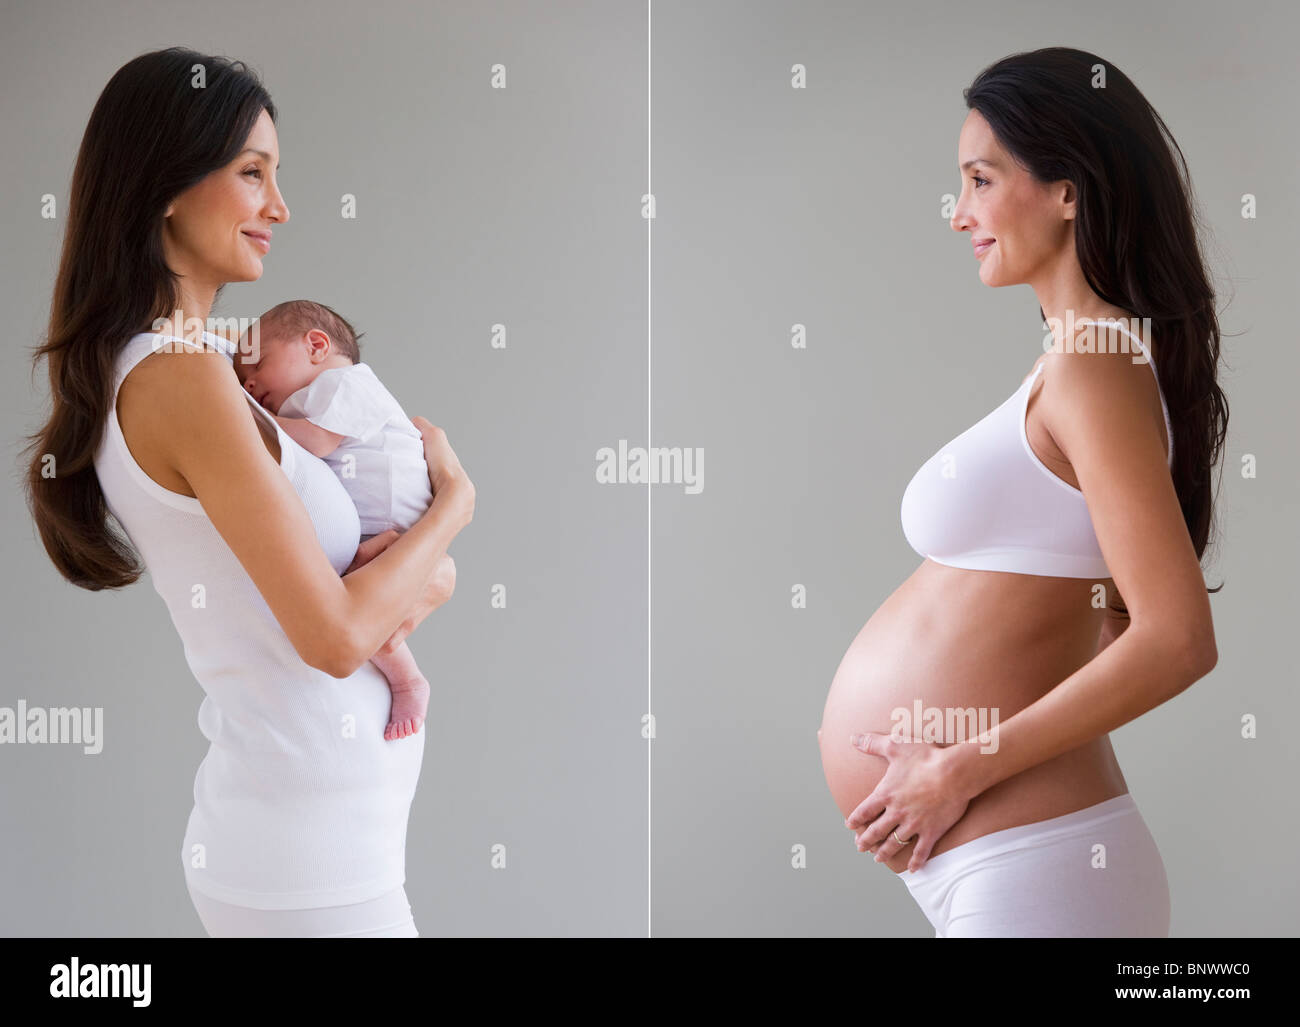 Before and after picture of pregnant woman Stock Photo